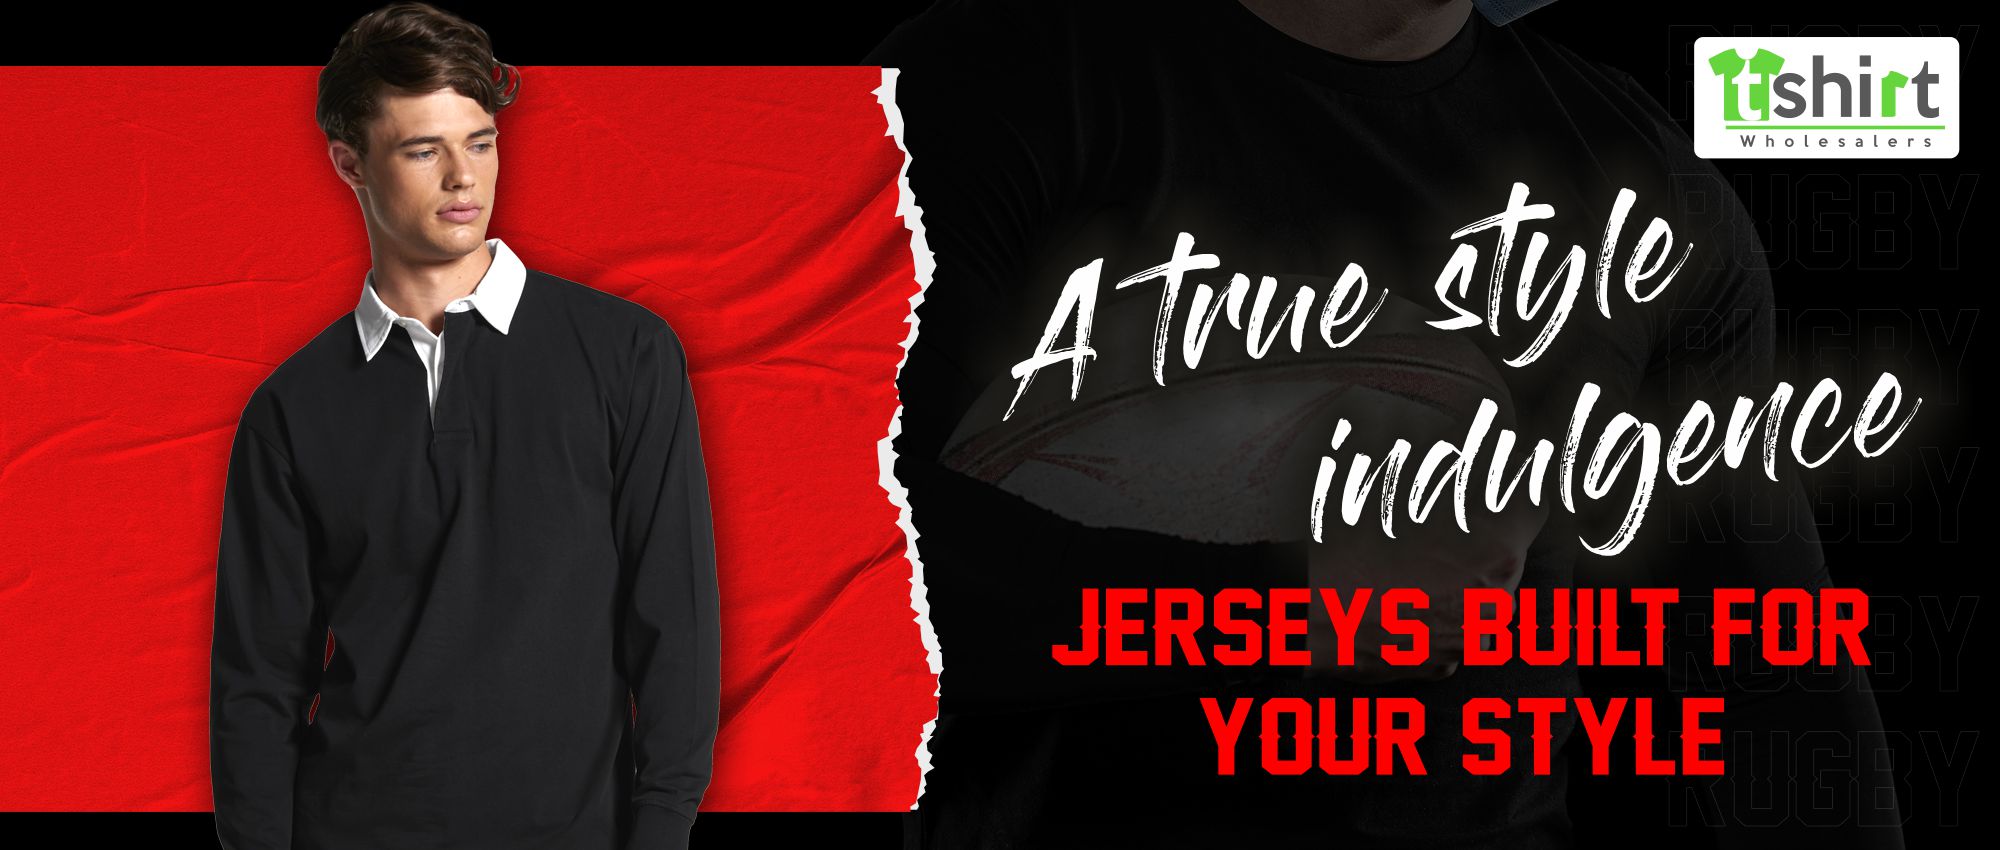 A TRUE STYLE INDULGENCE - JERSEYS BUILT FOR YOUR STYLE